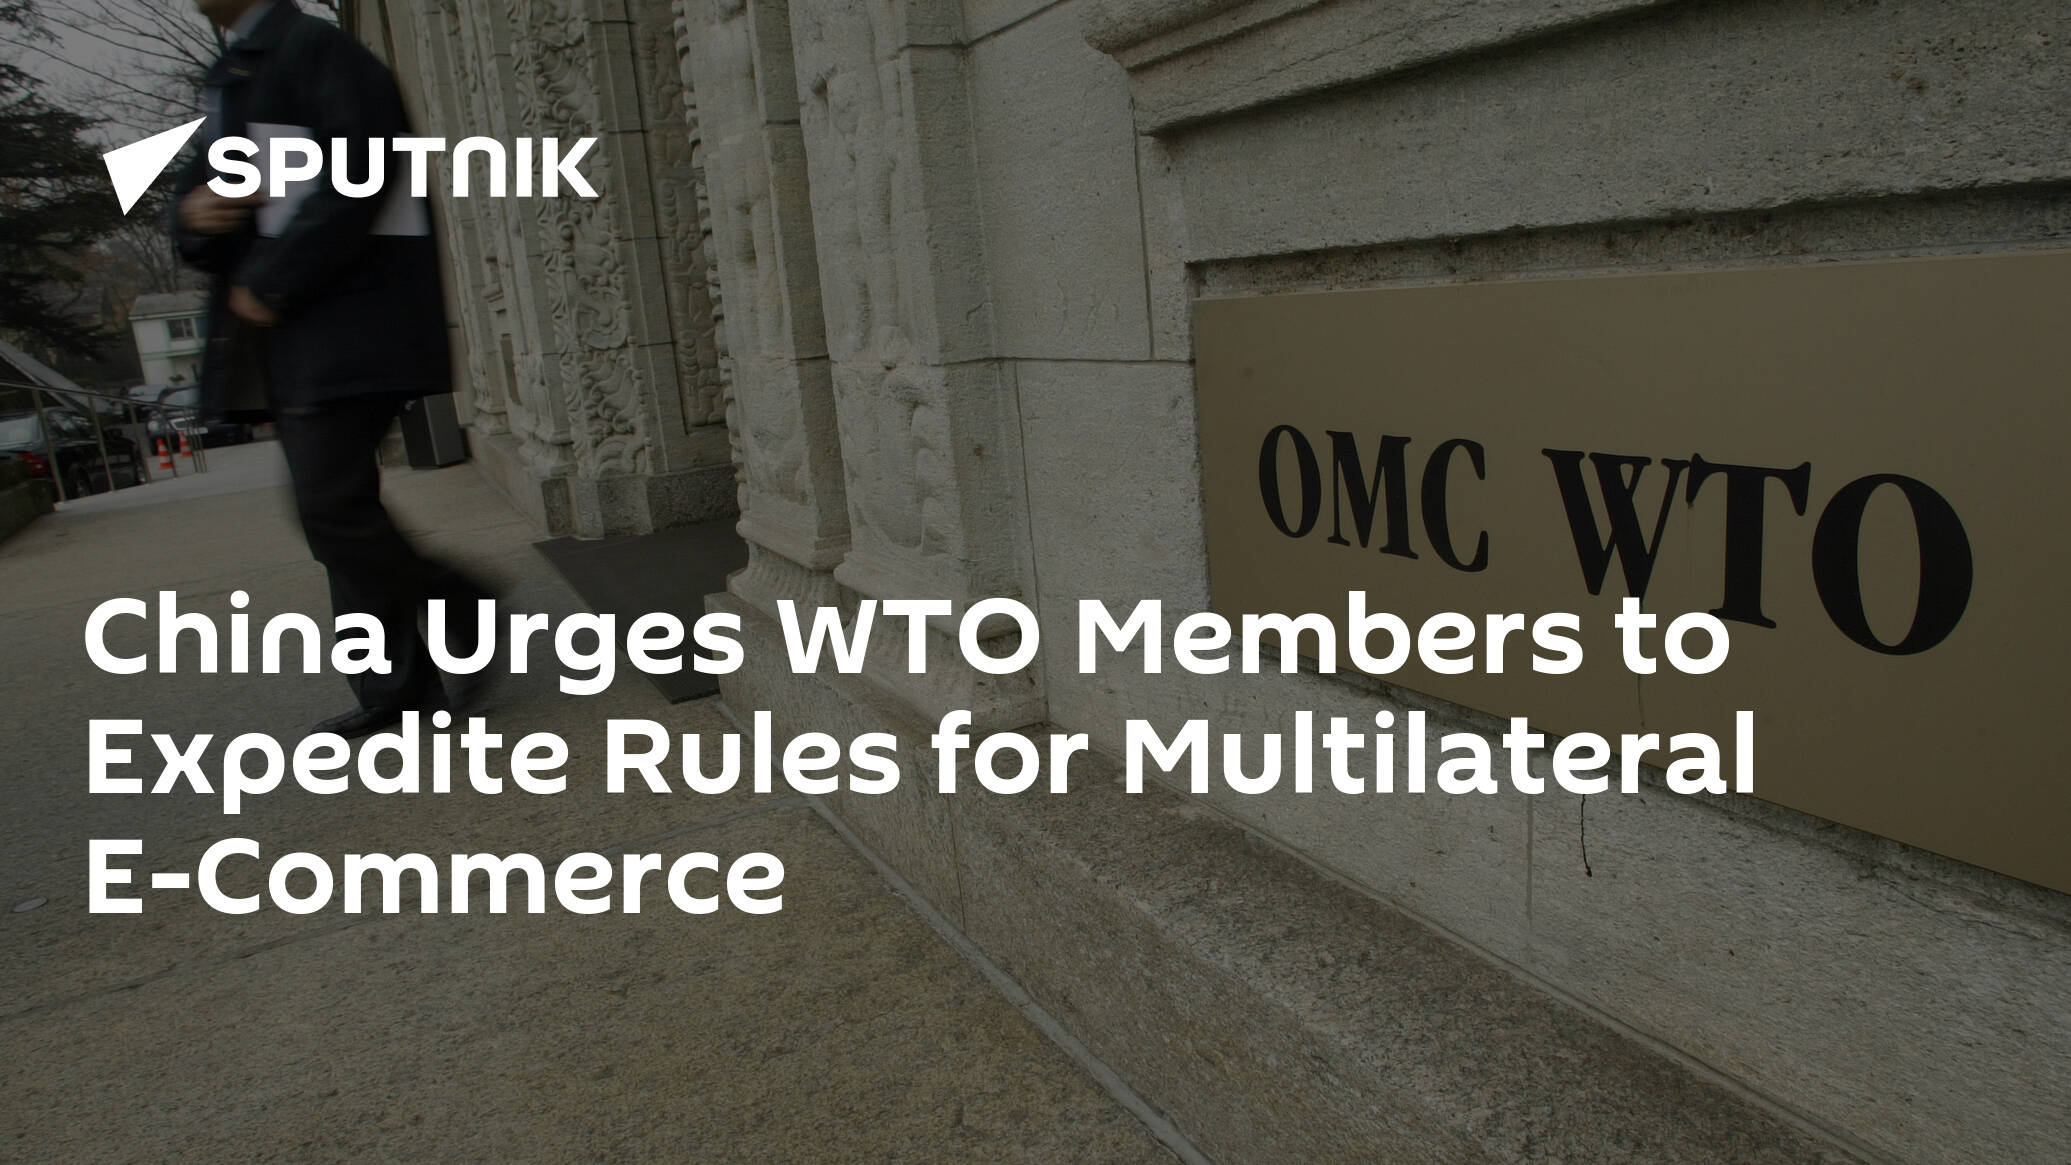 China Urges WTO Members to Expedite Rules for Multilateral E-Commerce